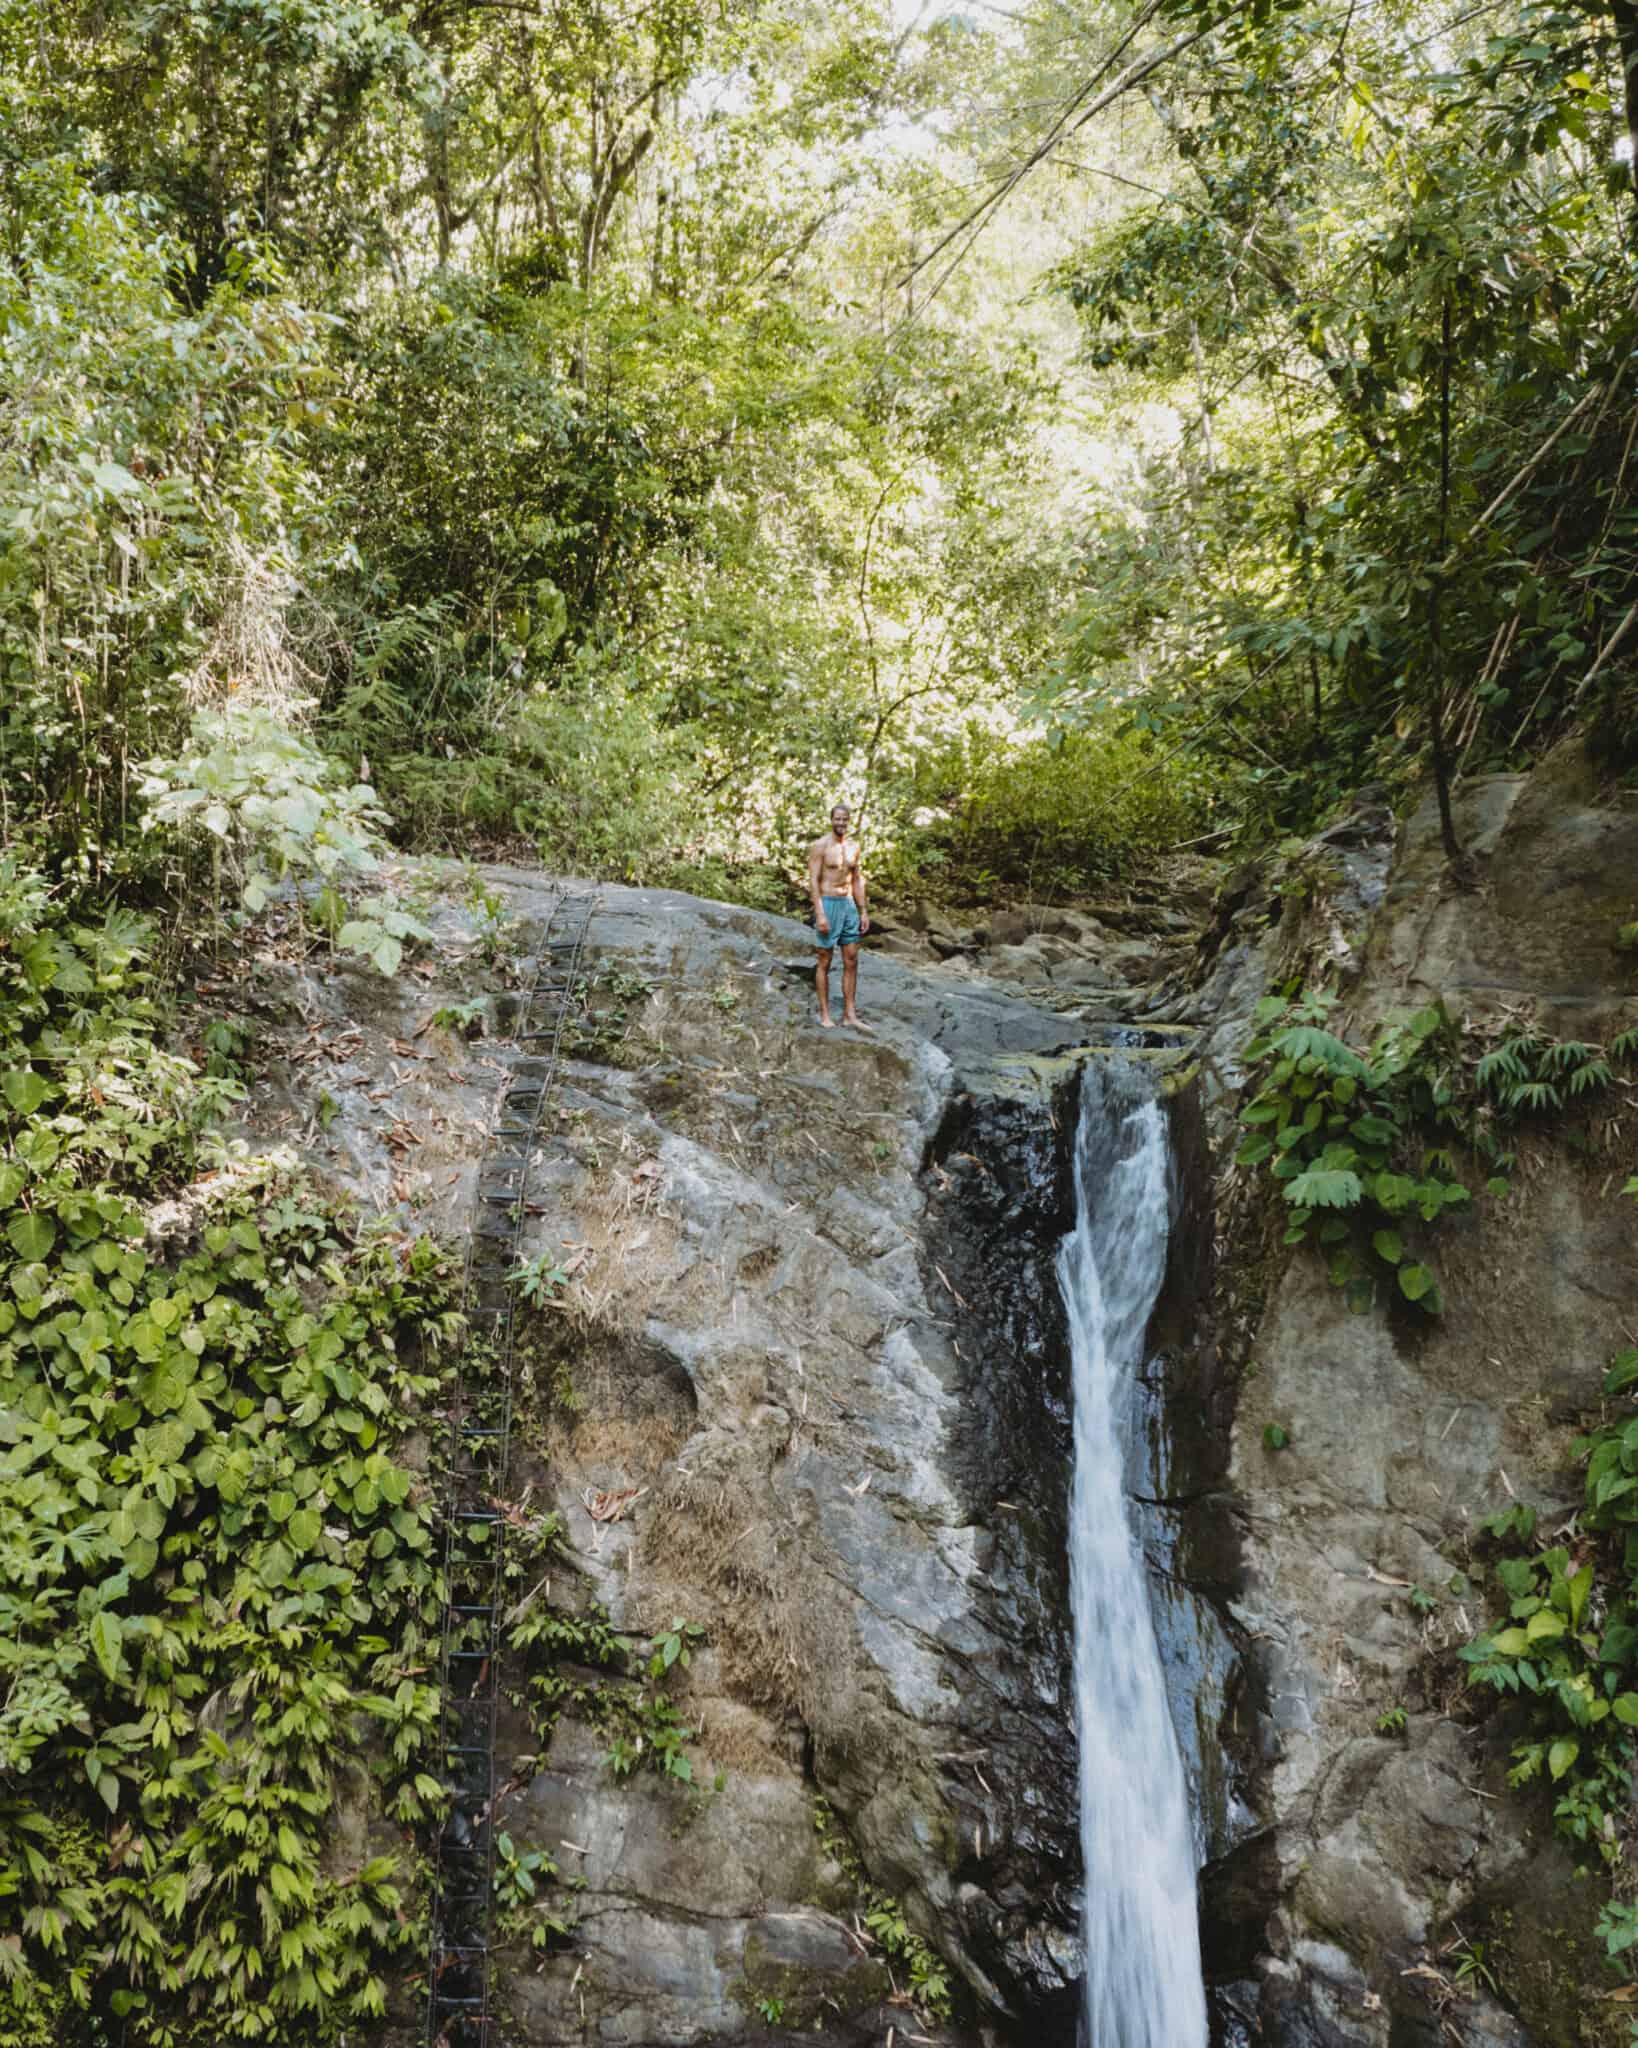 A woman standing next to a waterfall in Uvita, Costa Rica.